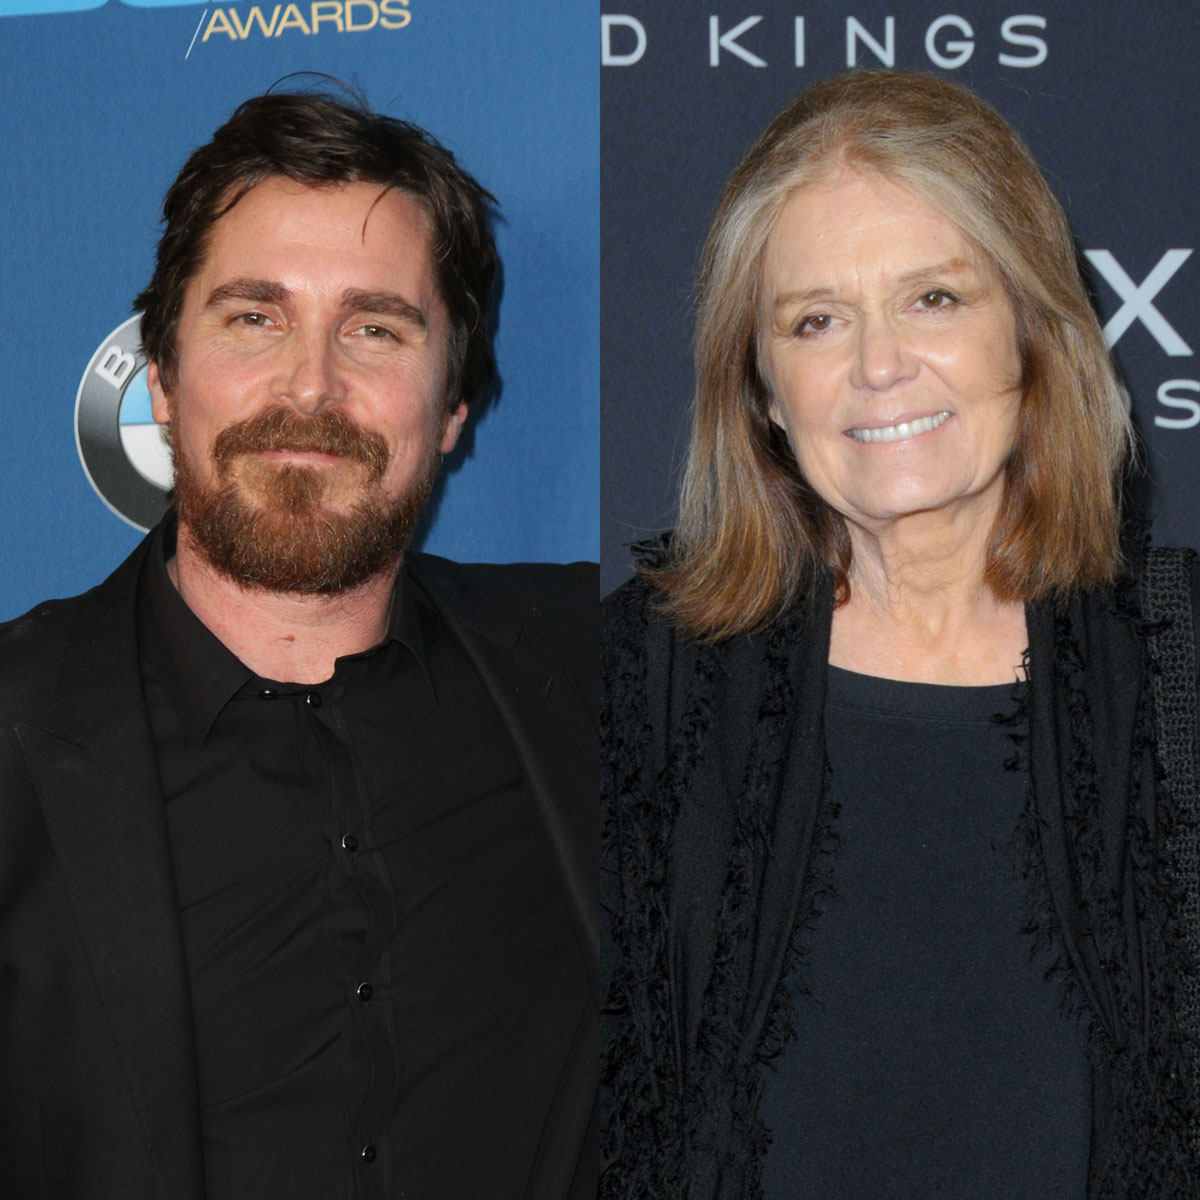 Christian Bale and Gloria Steinem are related